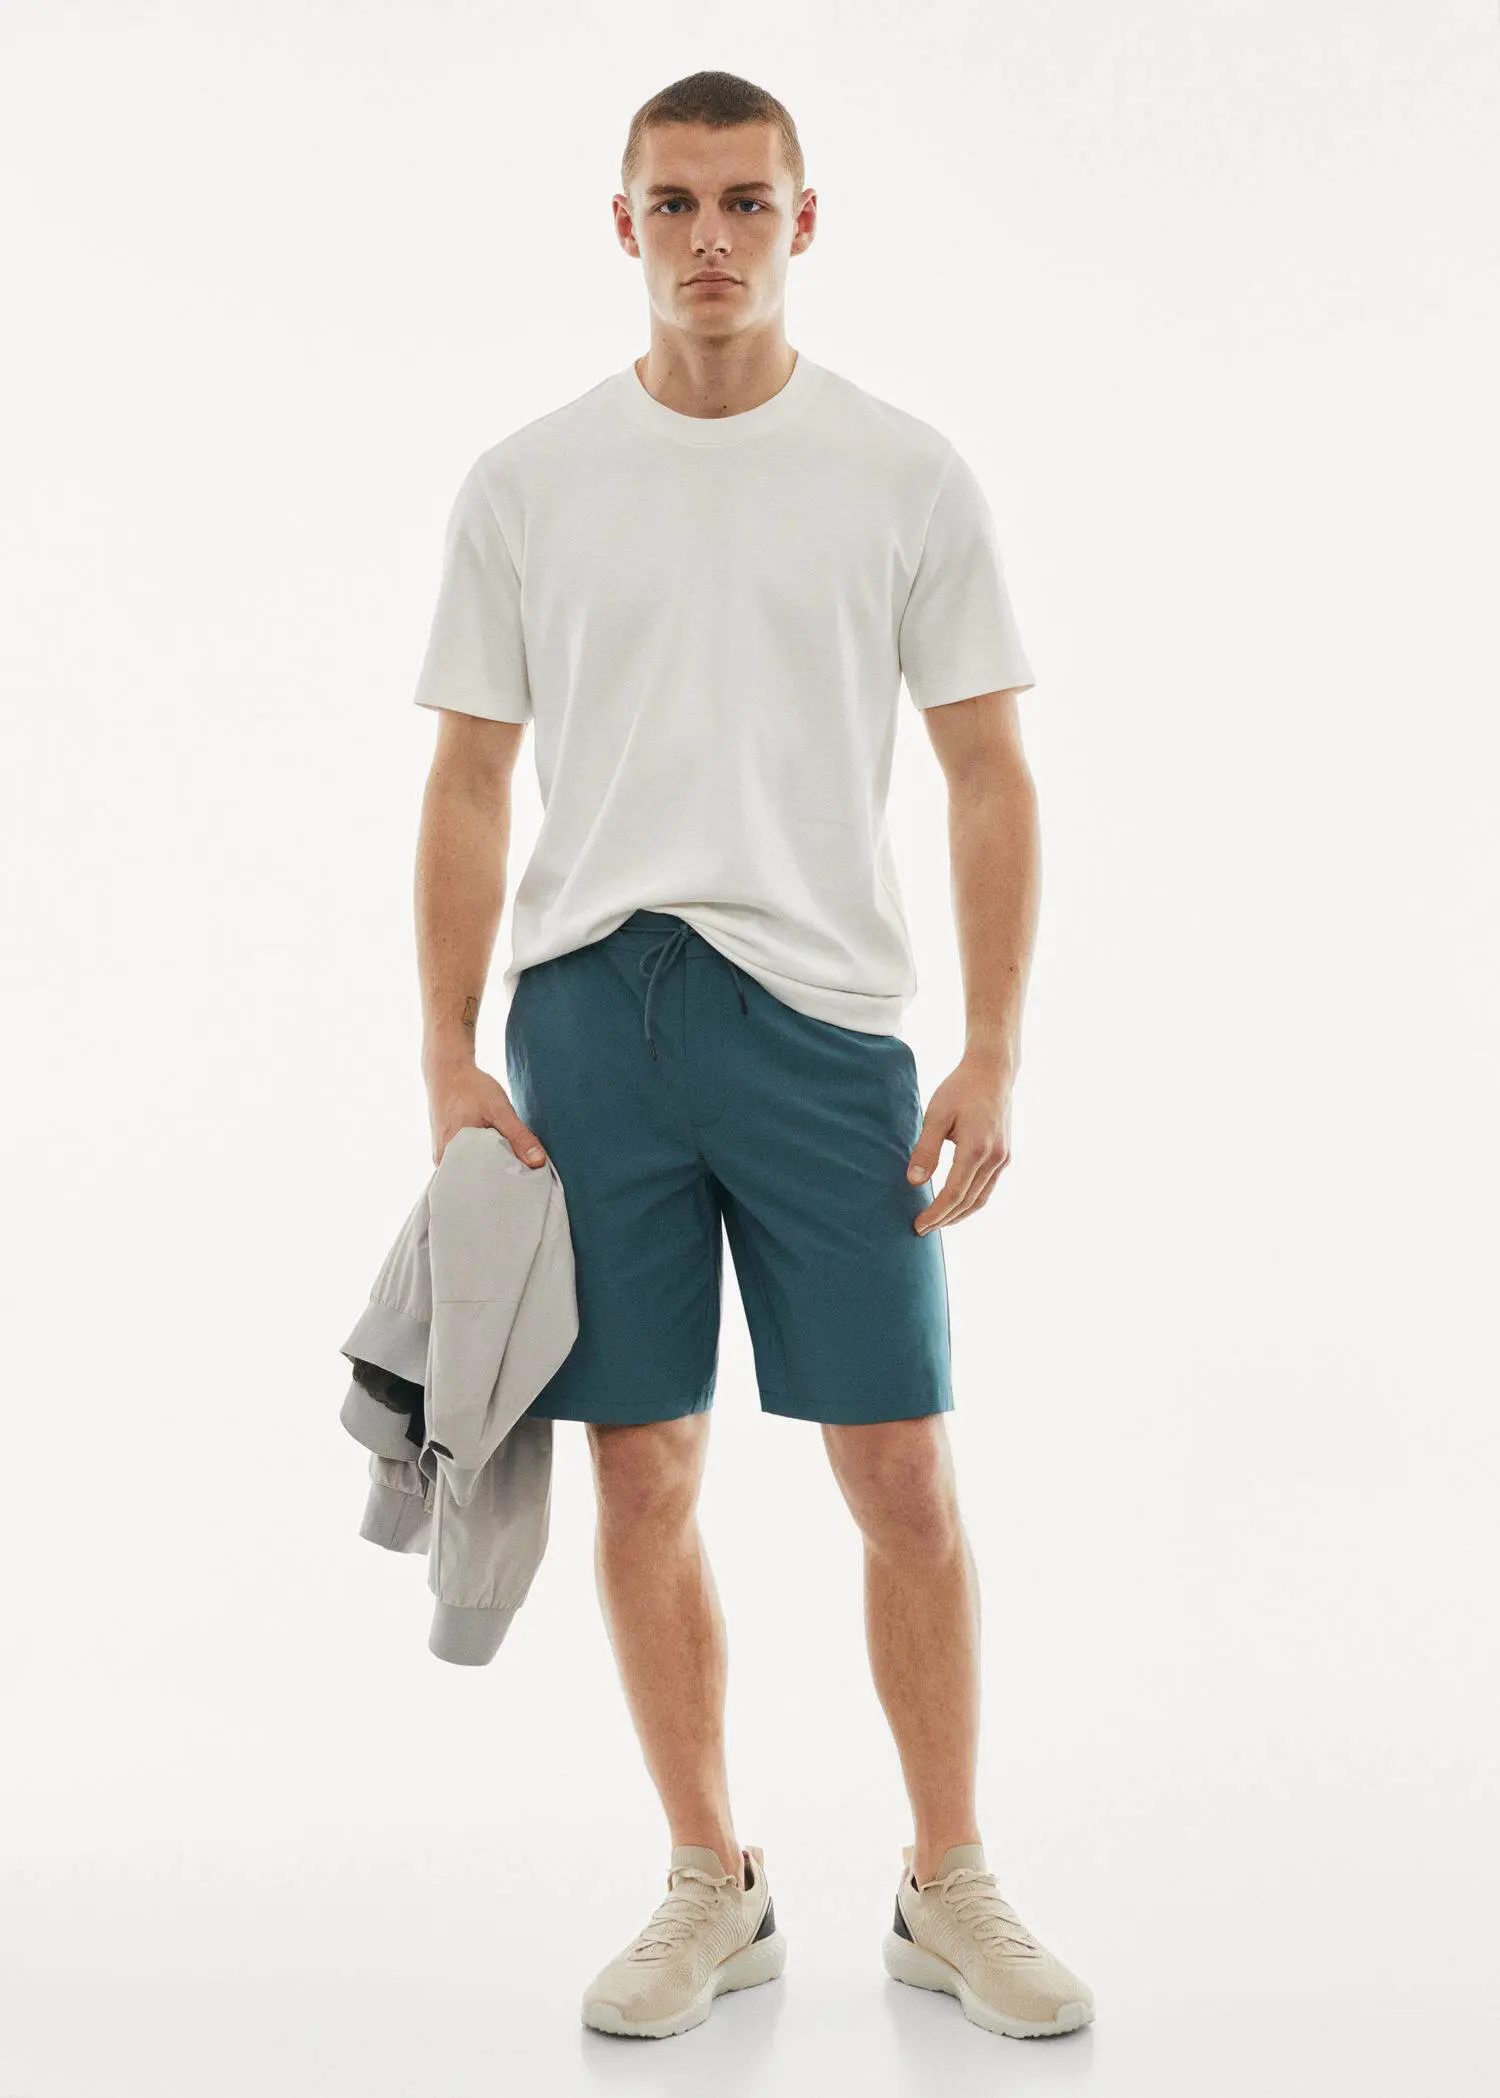 Mango Water-repellent technical bermuda shorts. a young man in a white t-shirt is holding a towel. 